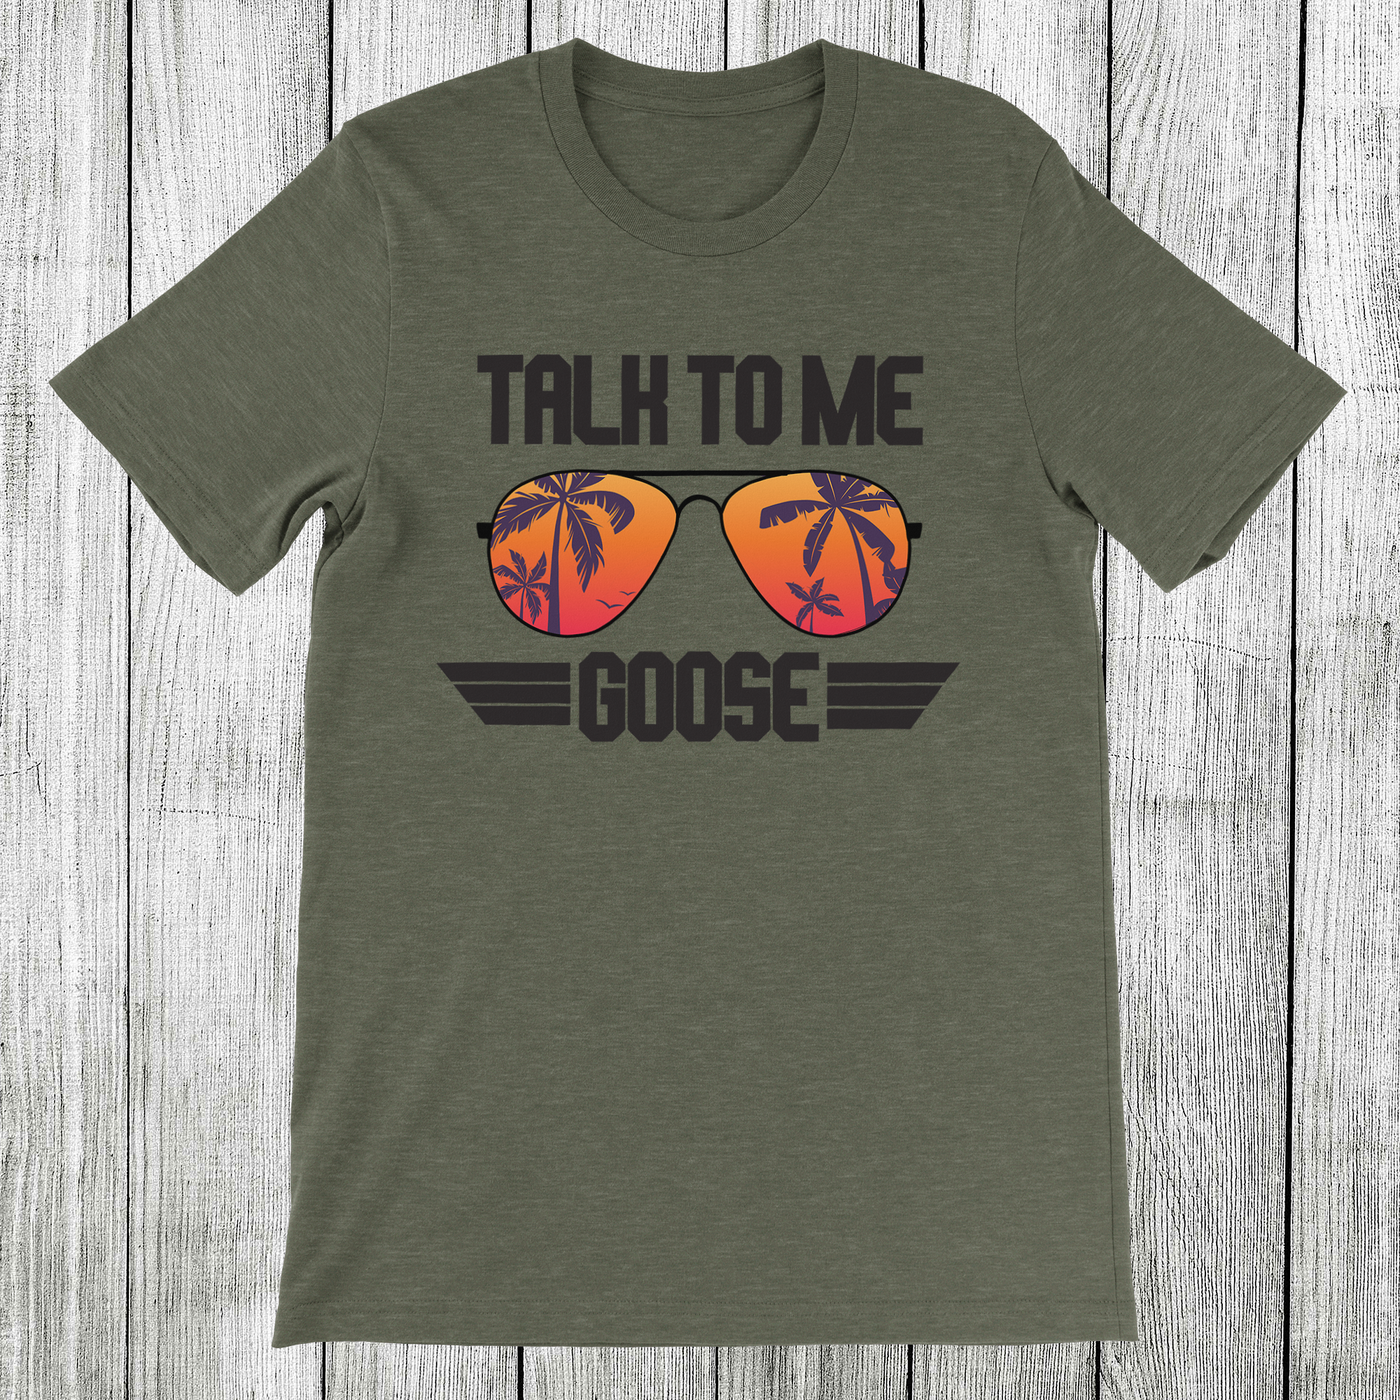 Daydream Tees Talk To Me Goose Palm Trees Military Green